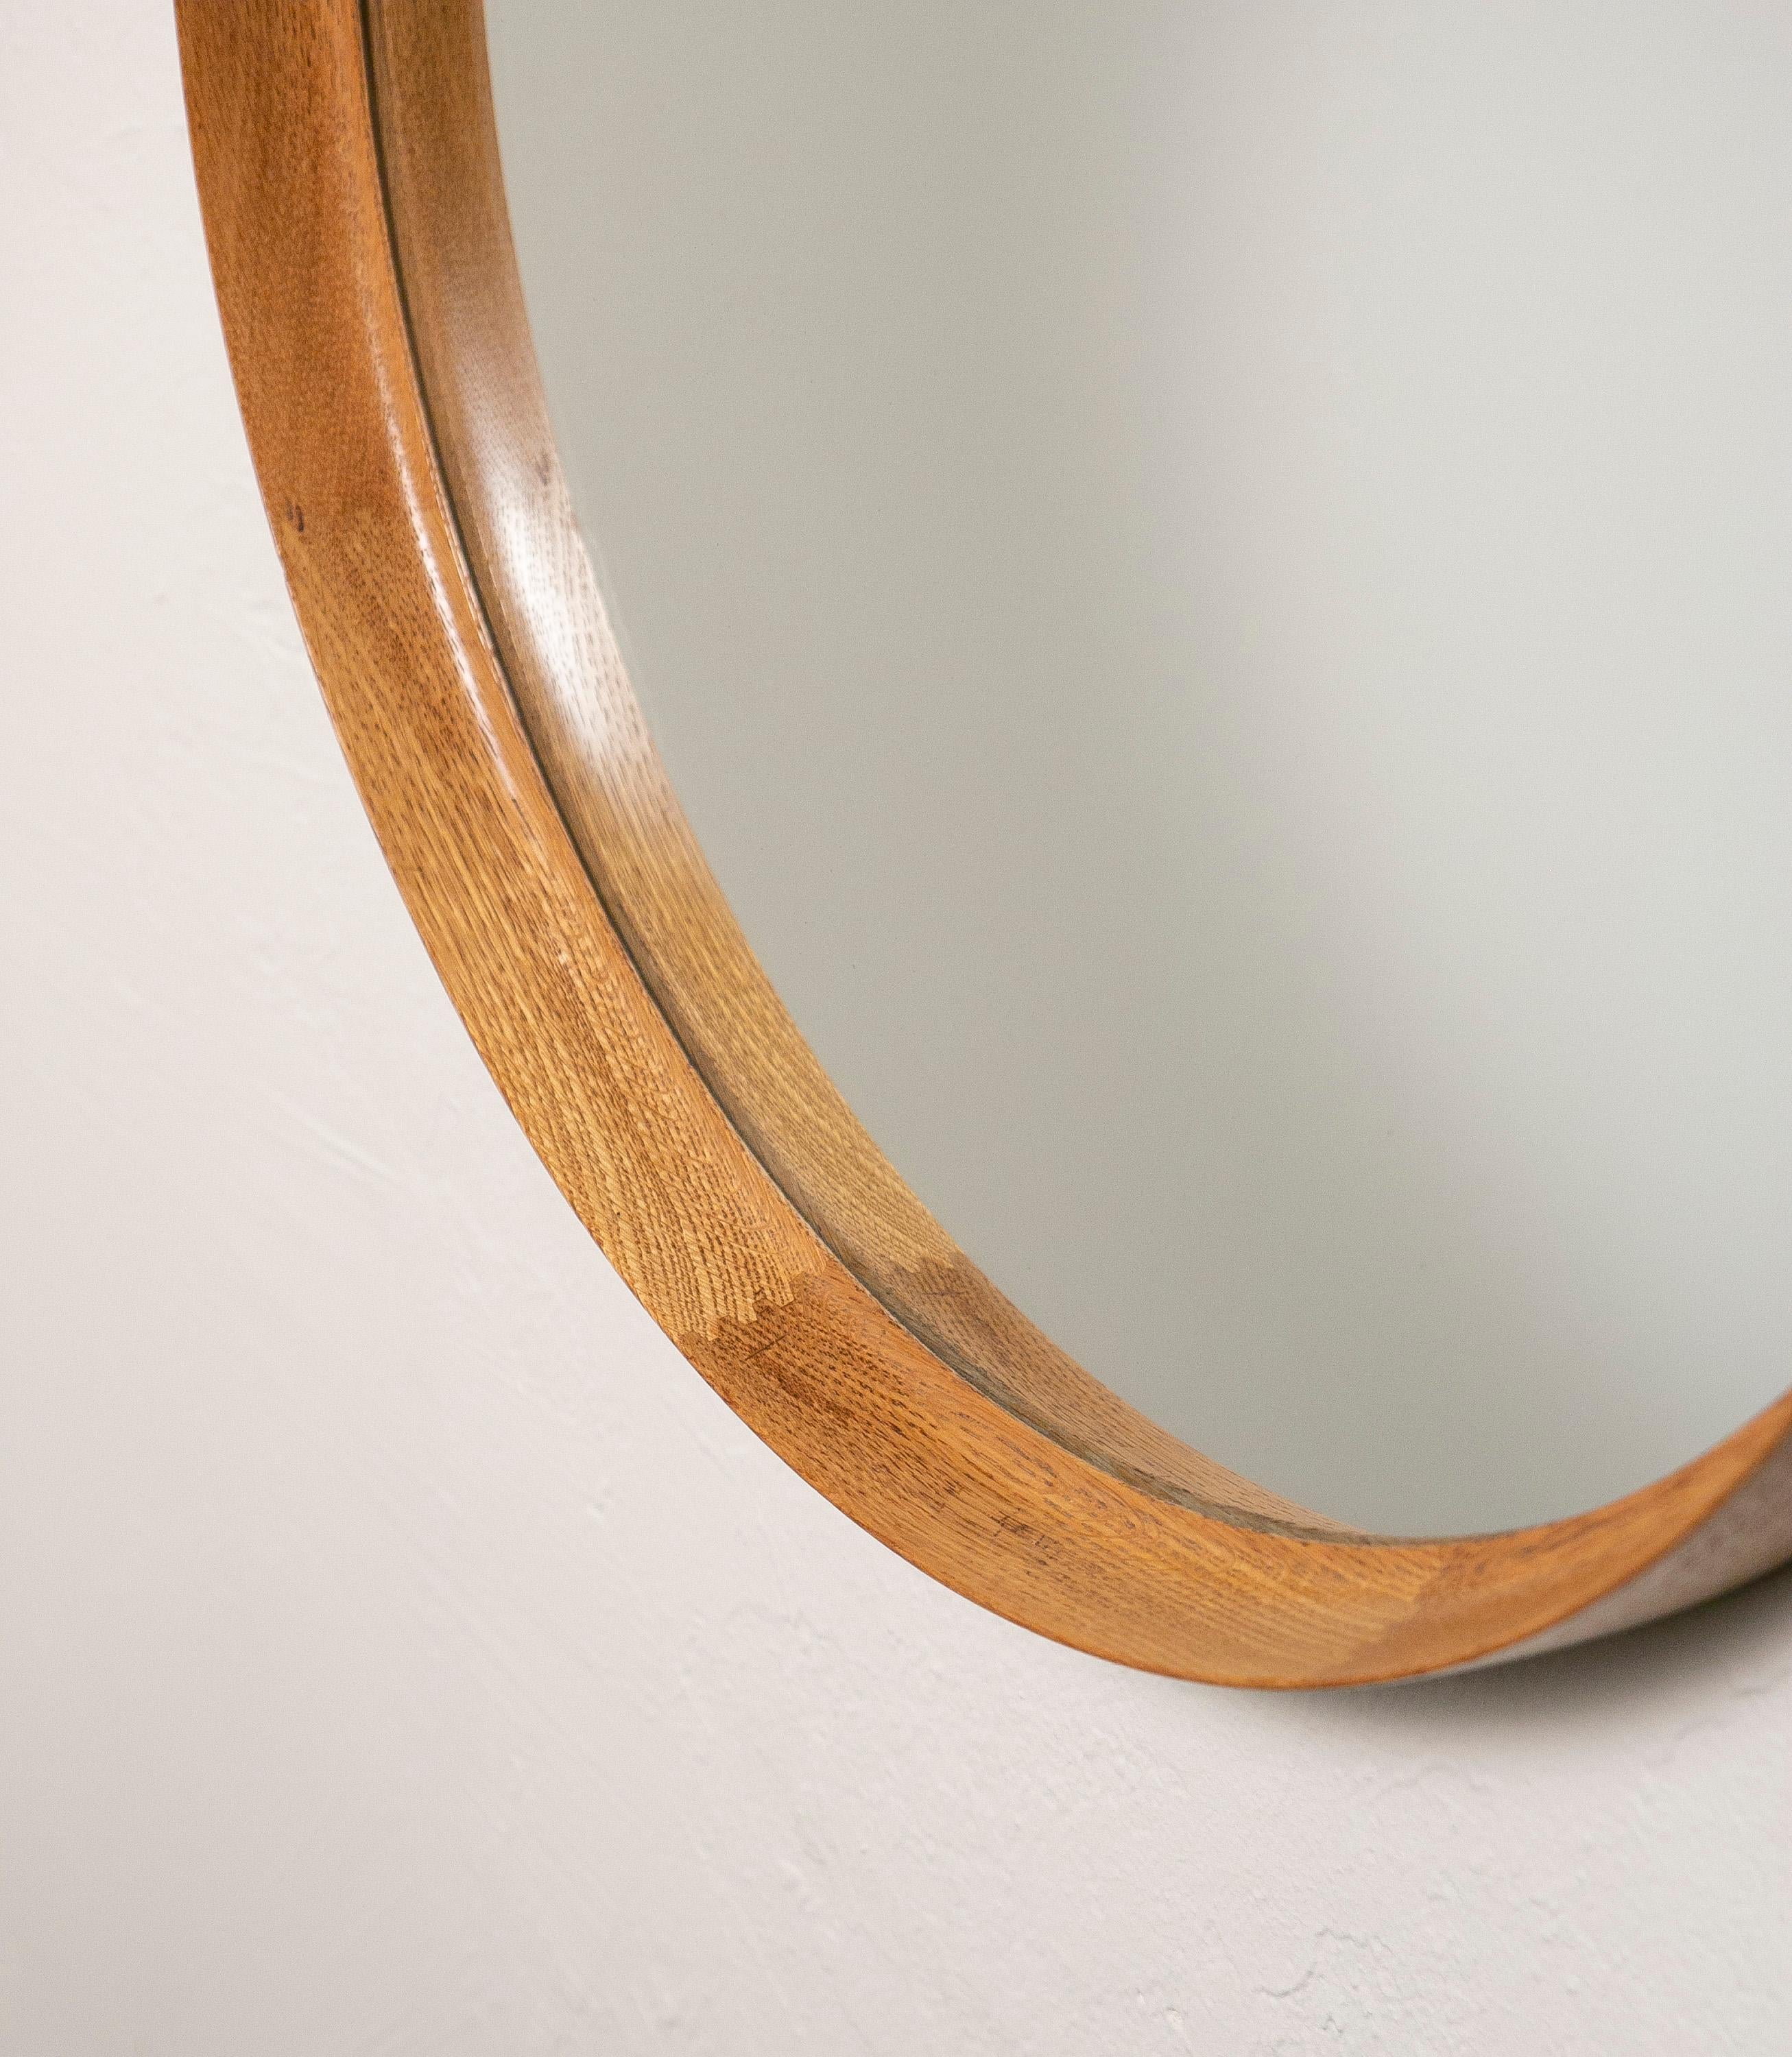 Uno & Östen Kristiansson, Round Oak mirror by Luxus, Vittsjö. Sweden, 1960s

This stunning vintage round European oak mirror is exquisitely framed in solid oak grain. Made in Sweden in the 1960s this is fantastic piece for an entrance way or dining